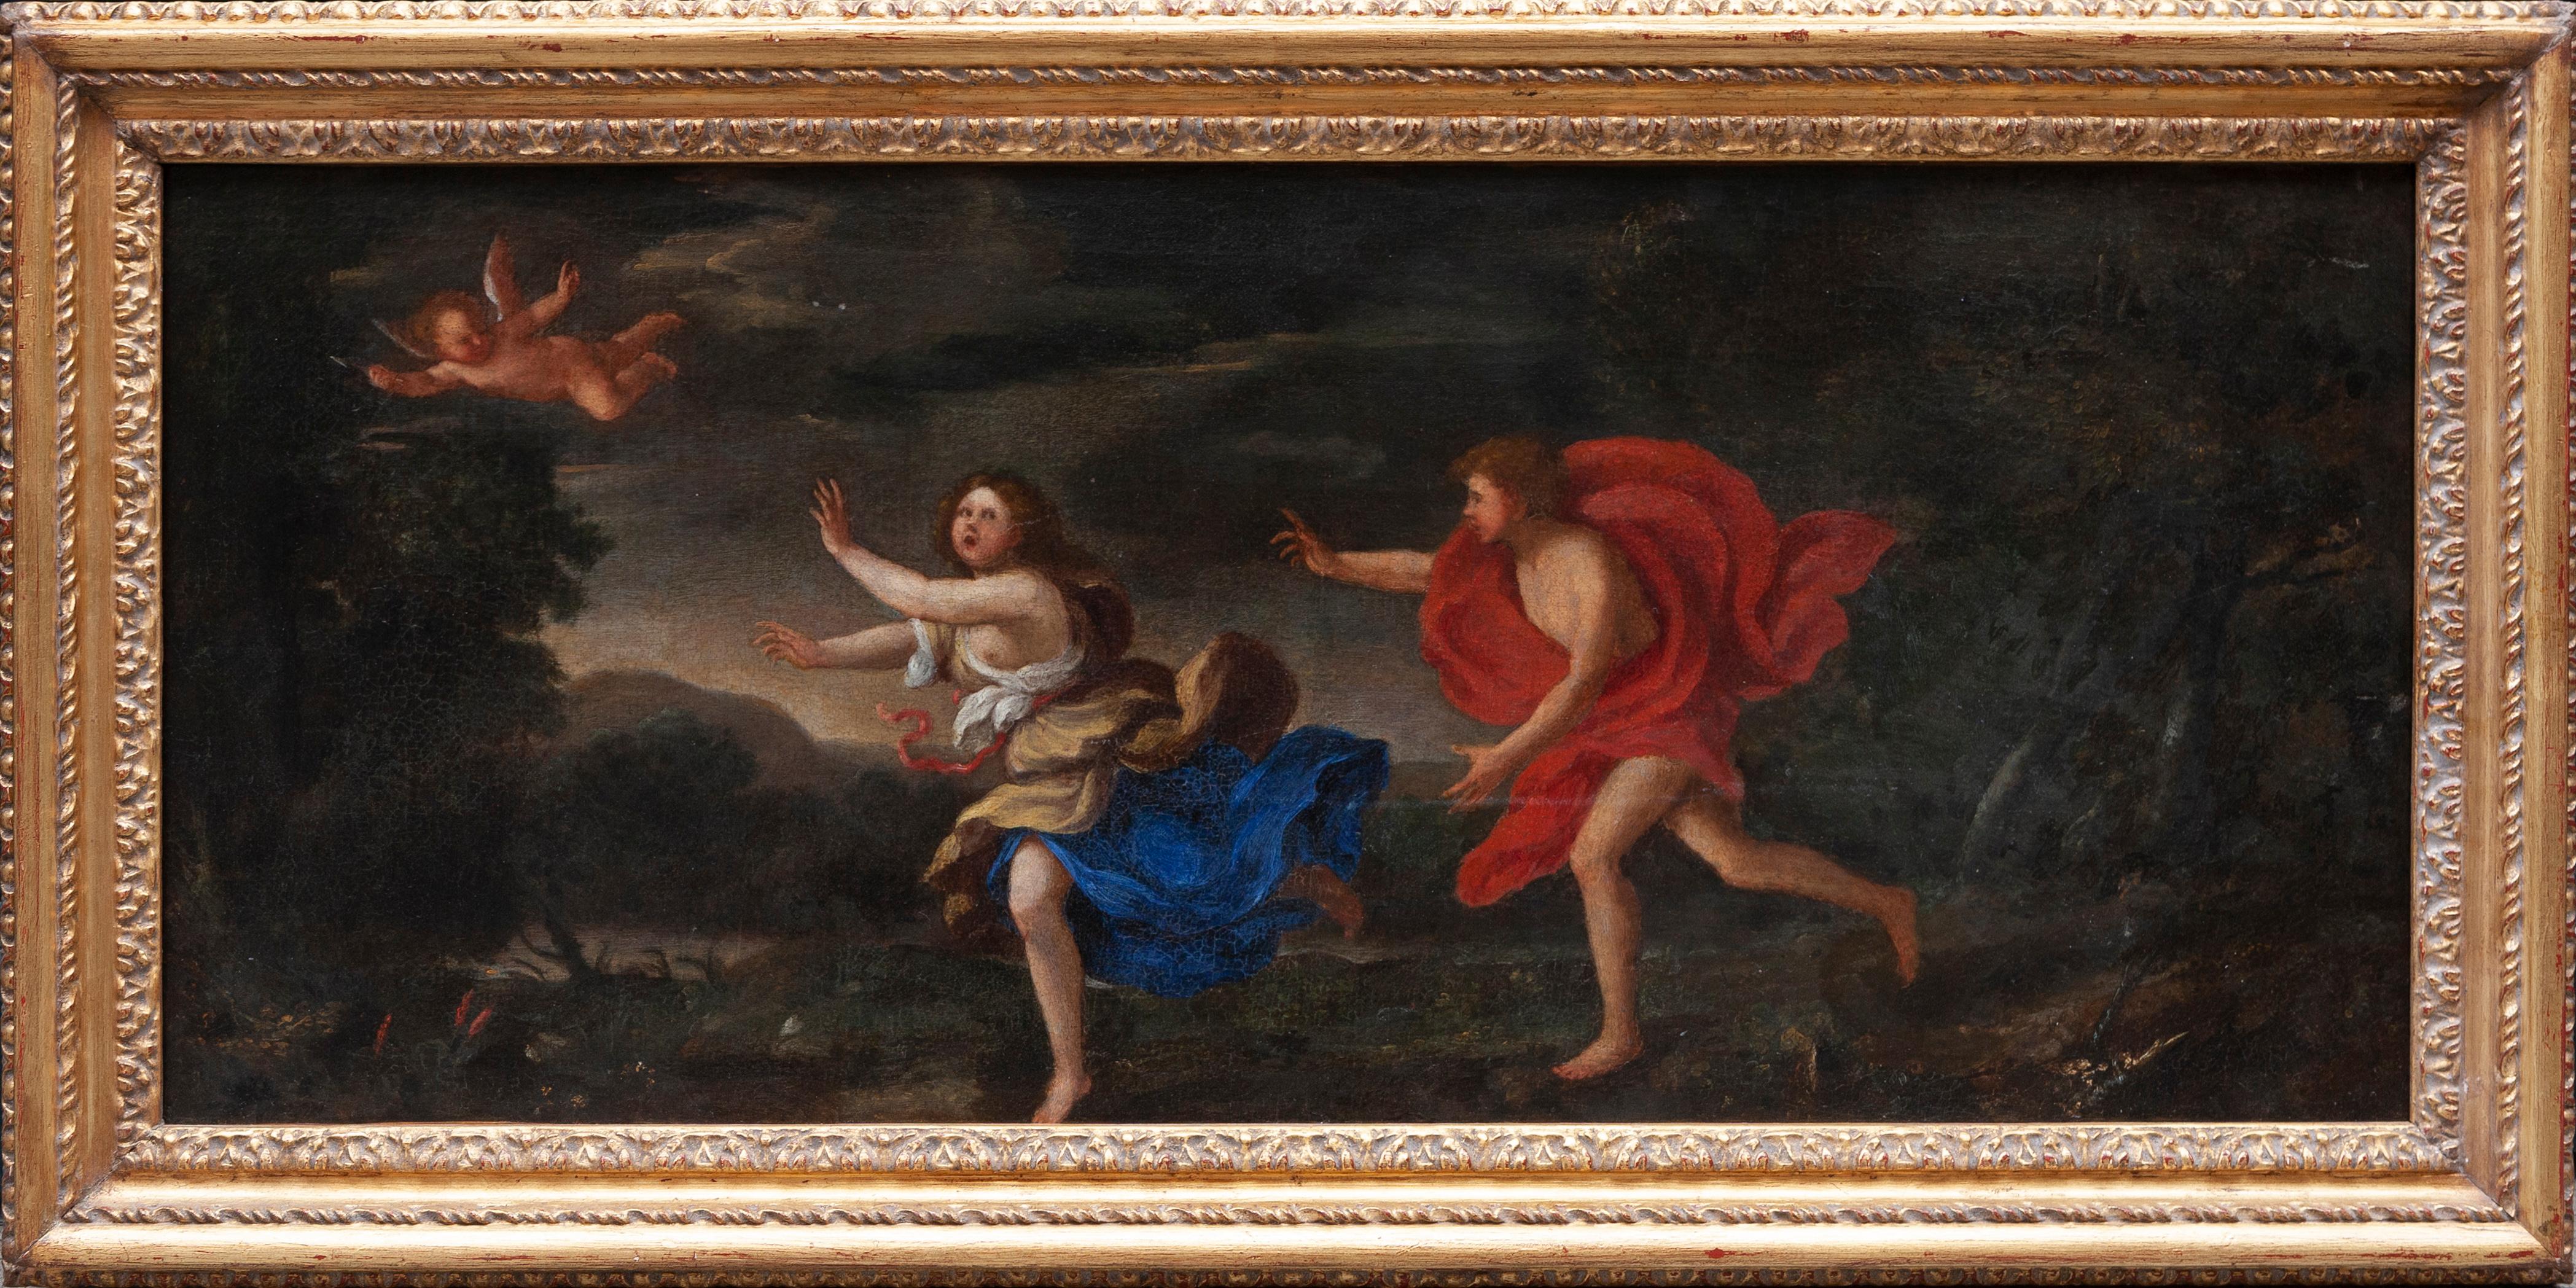 Unknown Figurative Painting - Apollo and Daphne - Painter active in the 17th century